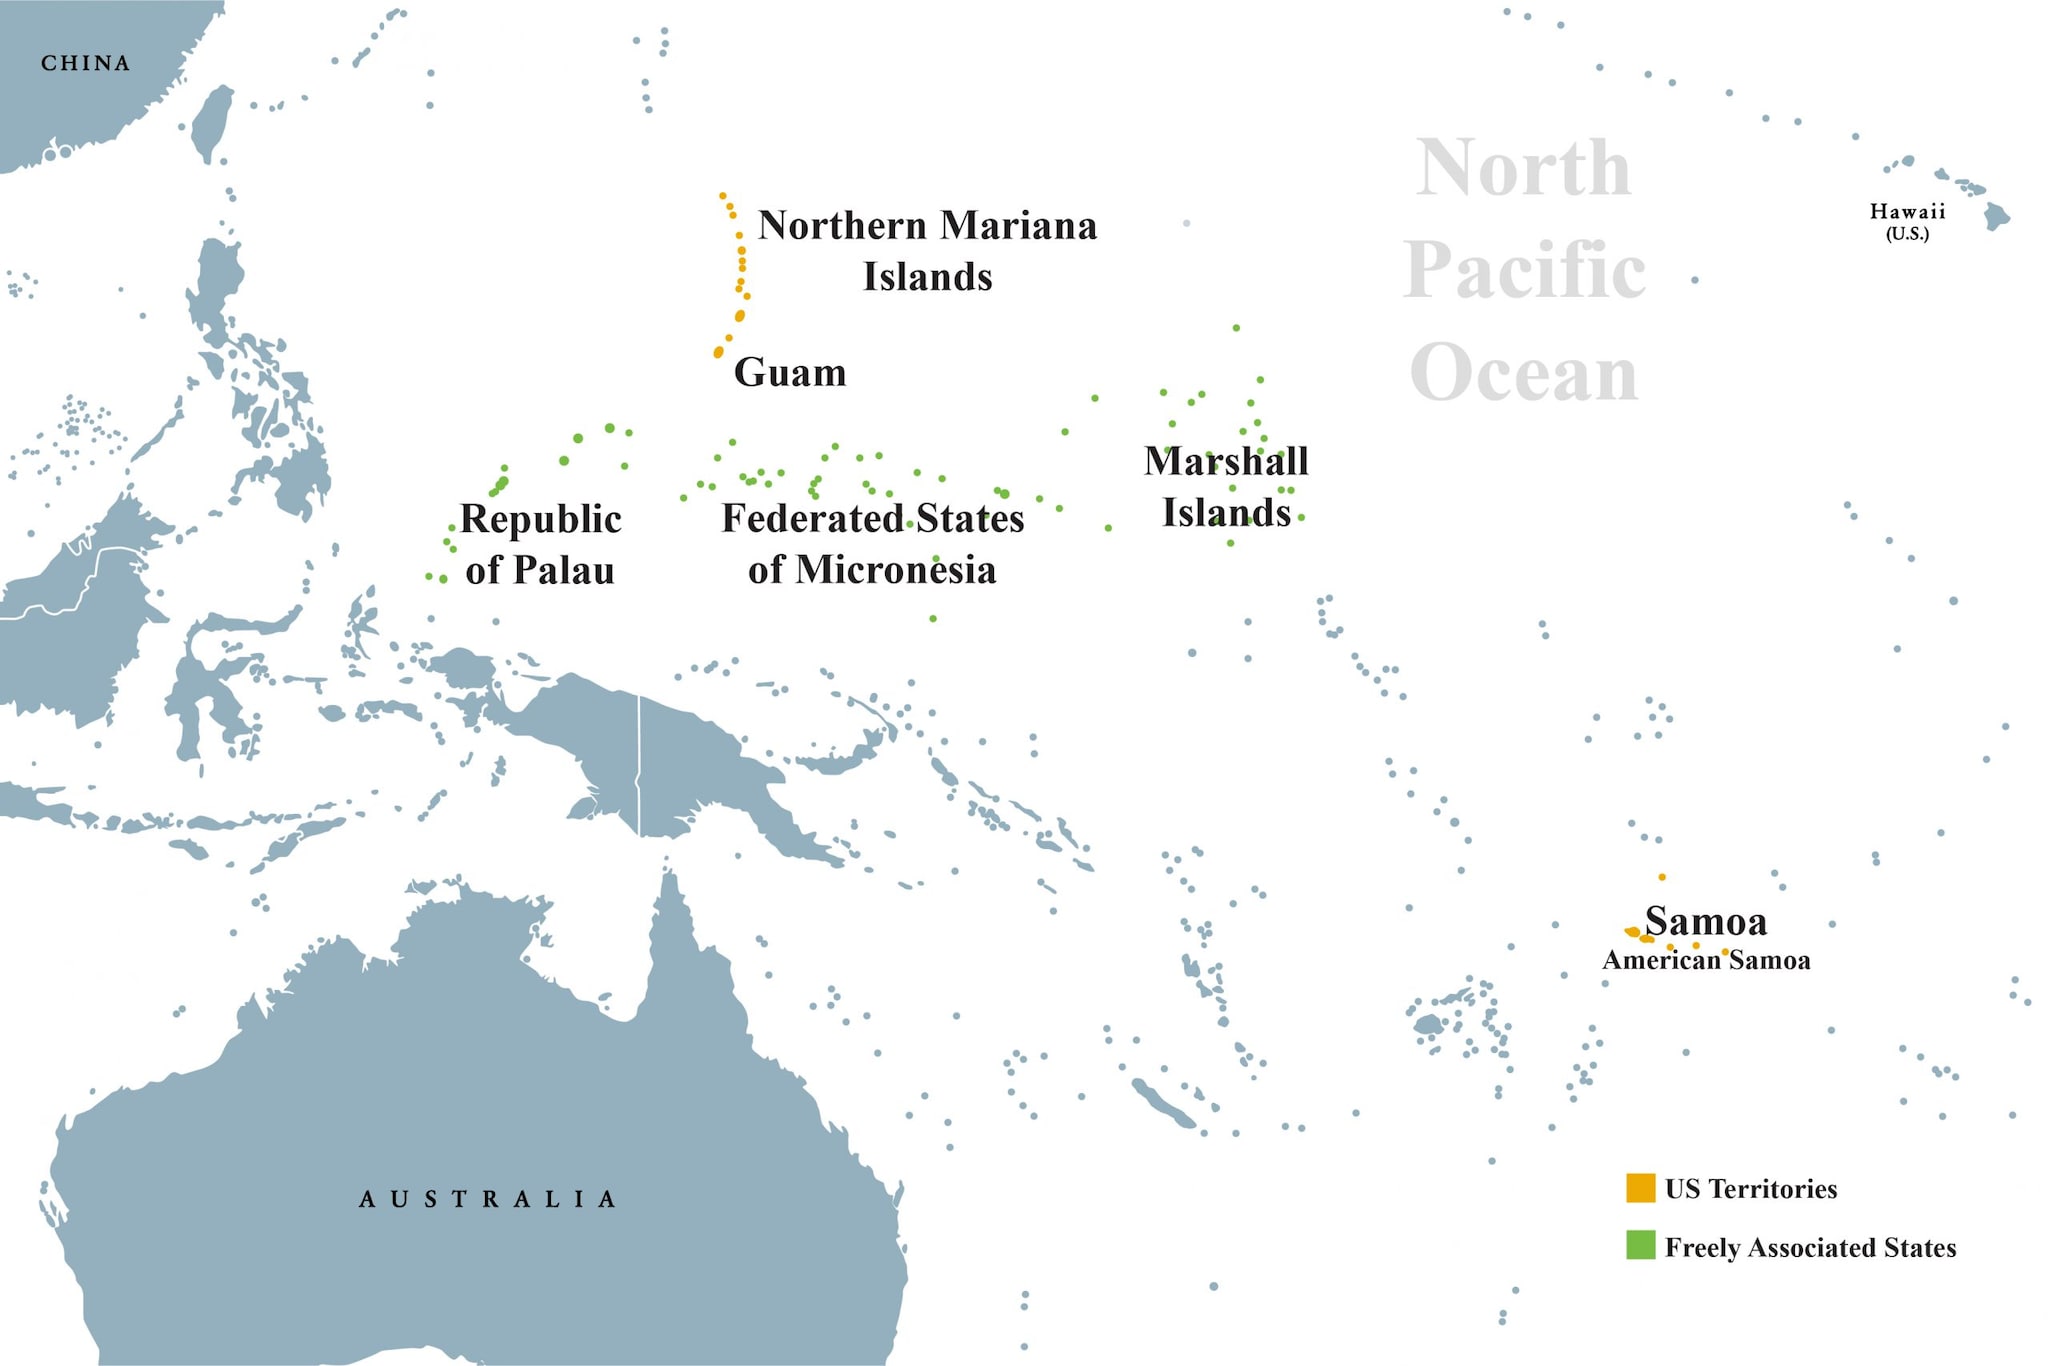 A map showing the Pacific islands. Water is shown in white and most land is shown in teal. Samoa and the Northern Mariana Islands are shown in orange, denoting that they are US territories. The Republic of Palau, the Federated States of Micronesia, and the Marshall Islands are shown in green, denoting that they are freely associated states.